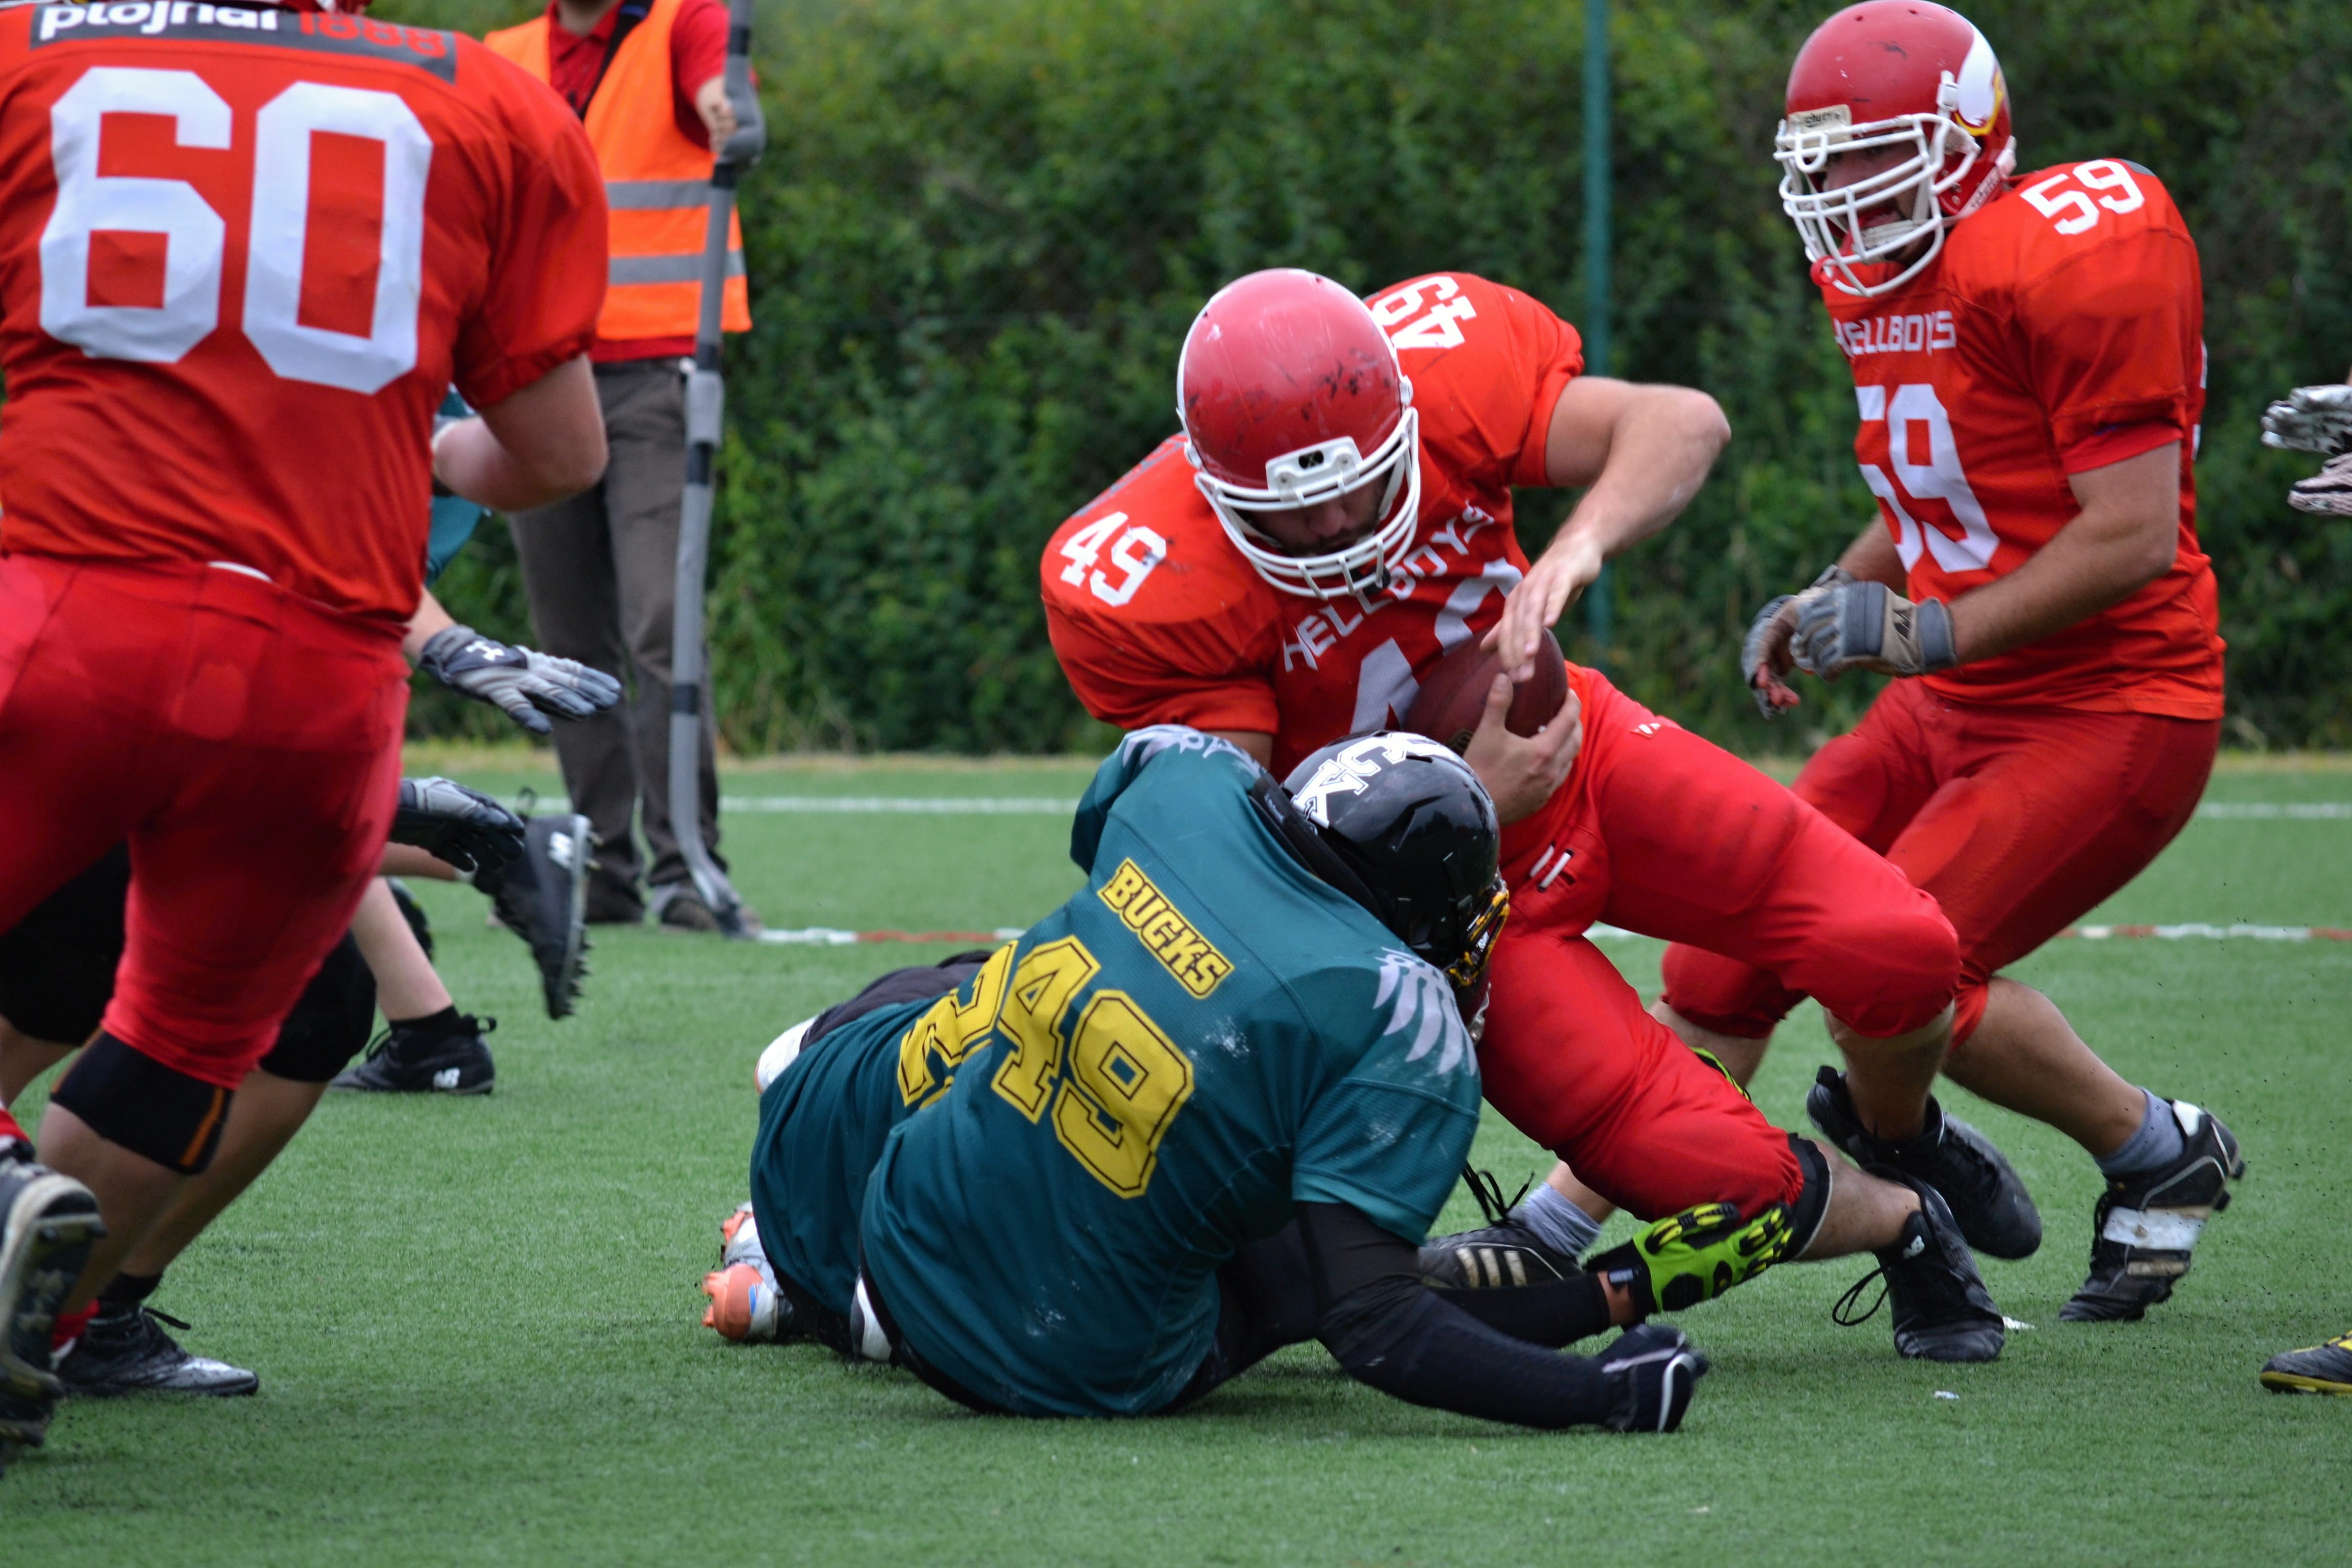 american football, contact game, opponent, teammates, sport